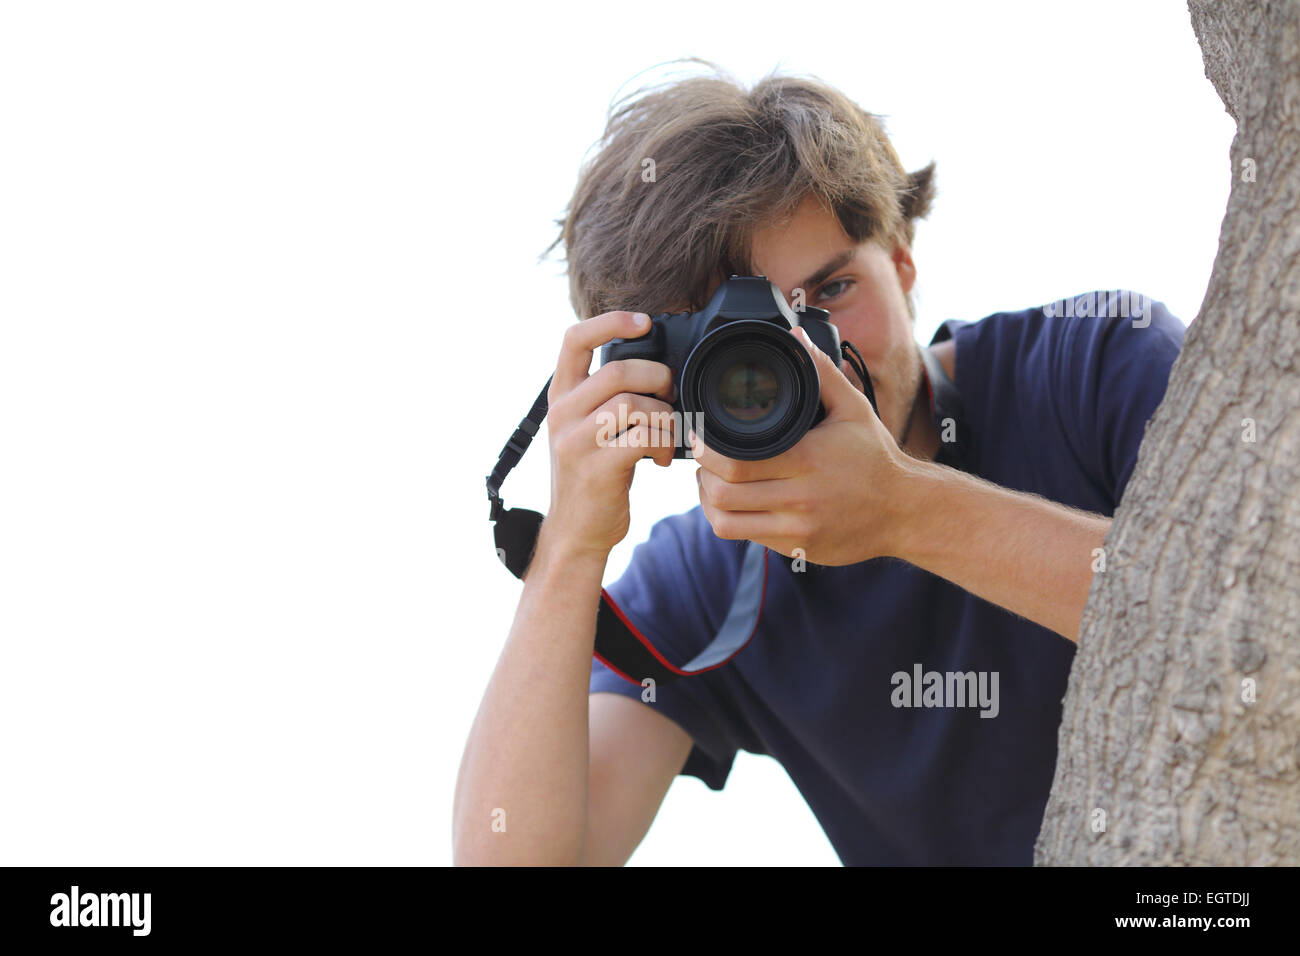 Paparazzi taking a photograph hidden on white isolated on a white background Stock Photo